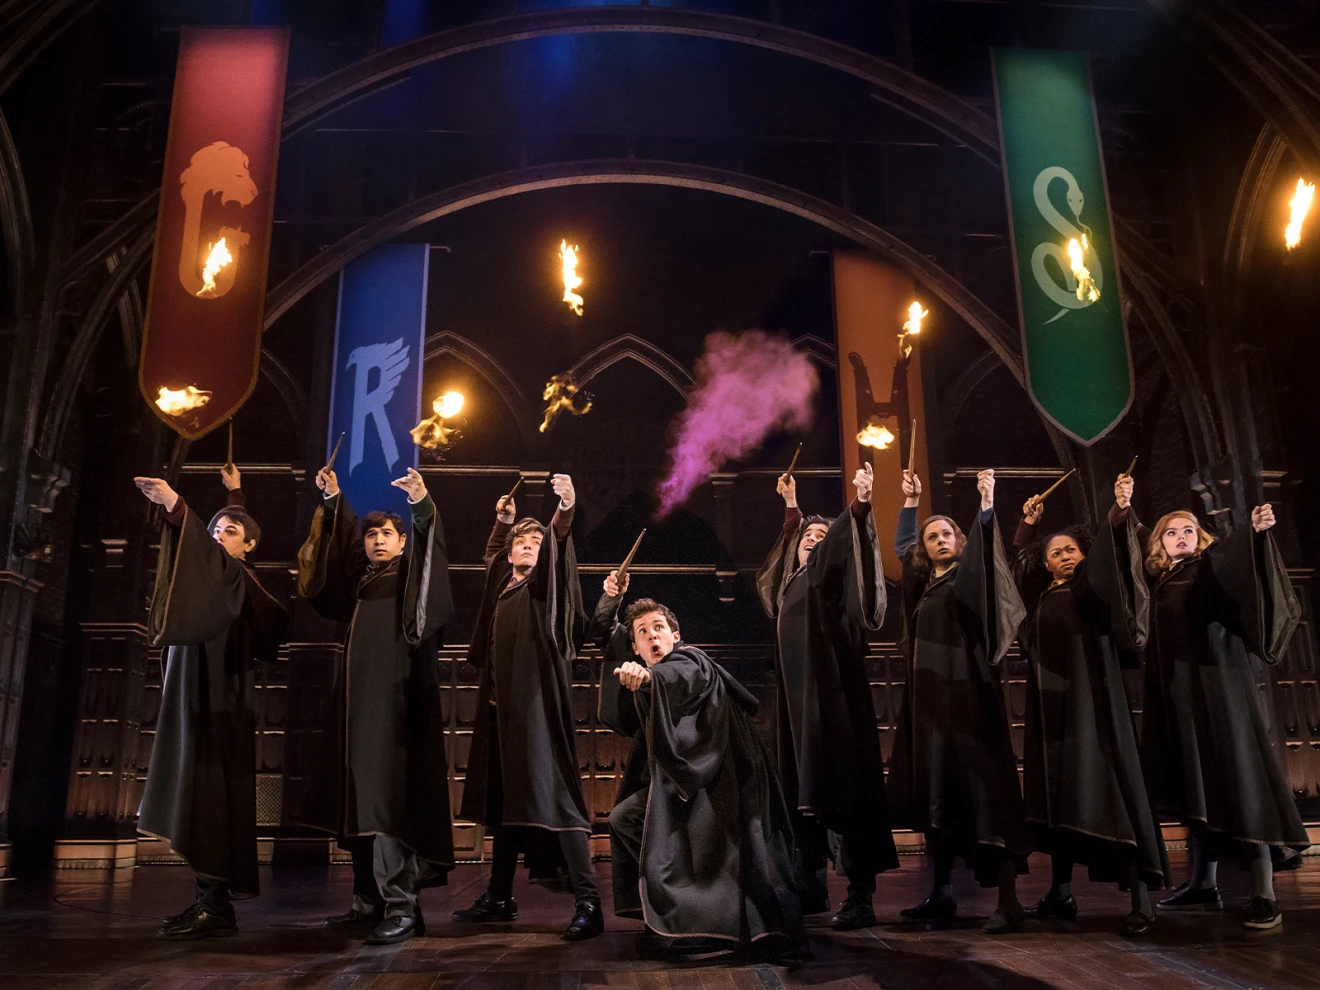 Harry Potter and the Cursed Child - House Pride Week